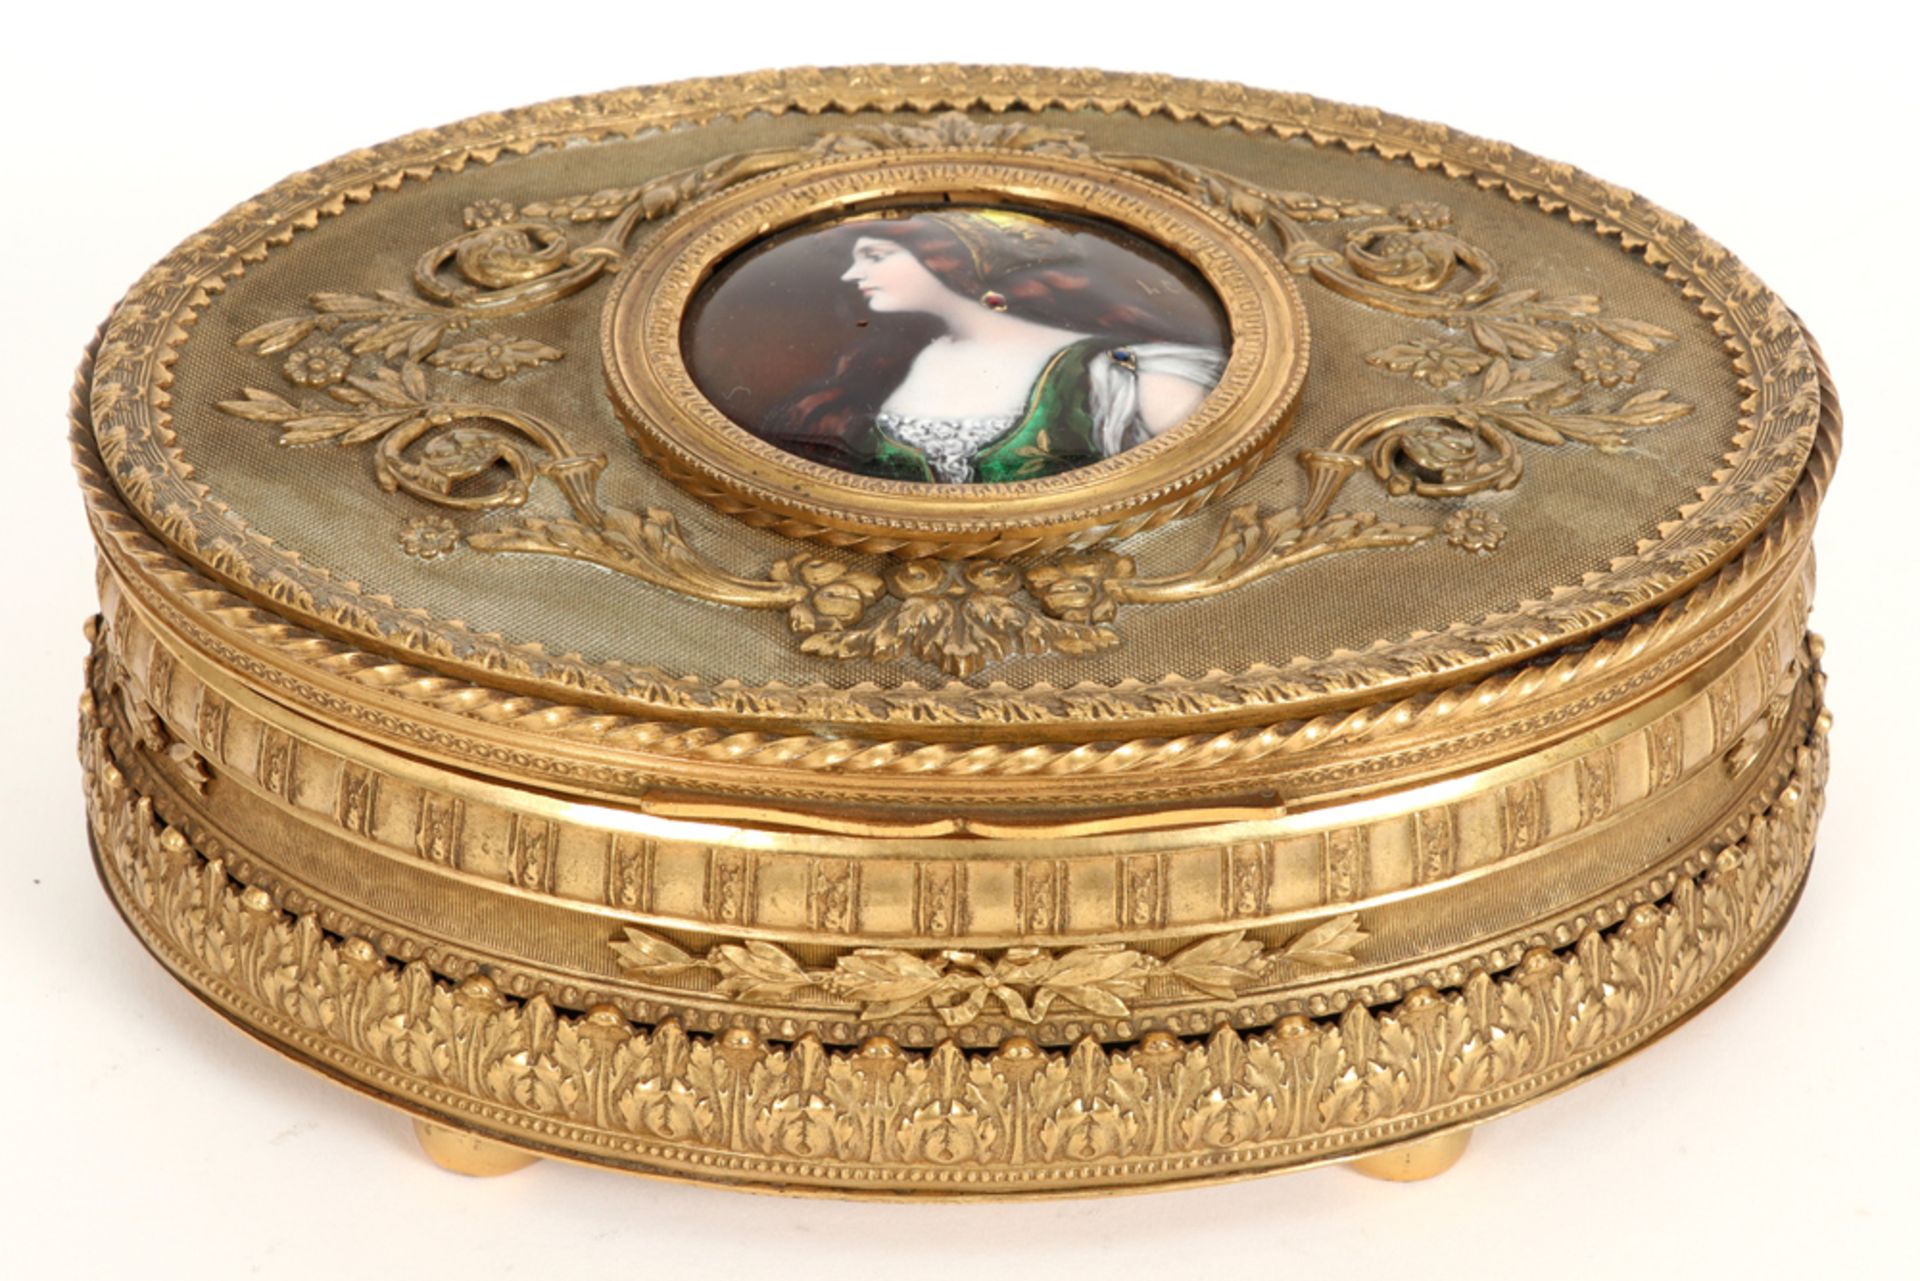 antique oval box in gilded metal with on its lid a round Limoges enamel plaque || Antieke ovale doos